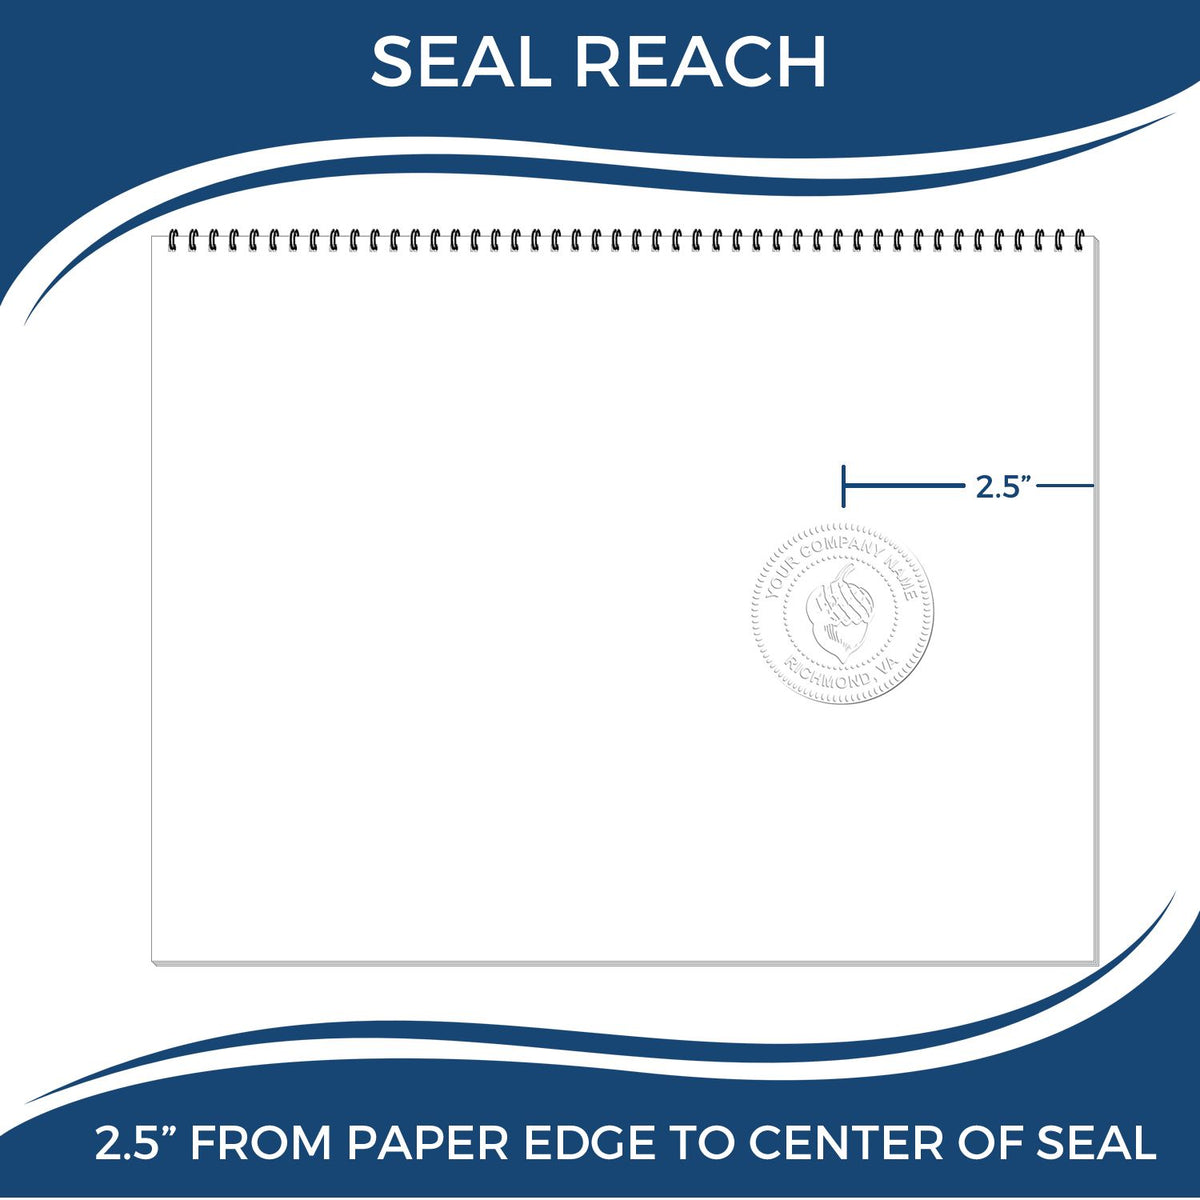 An infographic showing the seal reach which is represented by a ruler and a miniature seal image of the Long Reach Nevada PE Seal